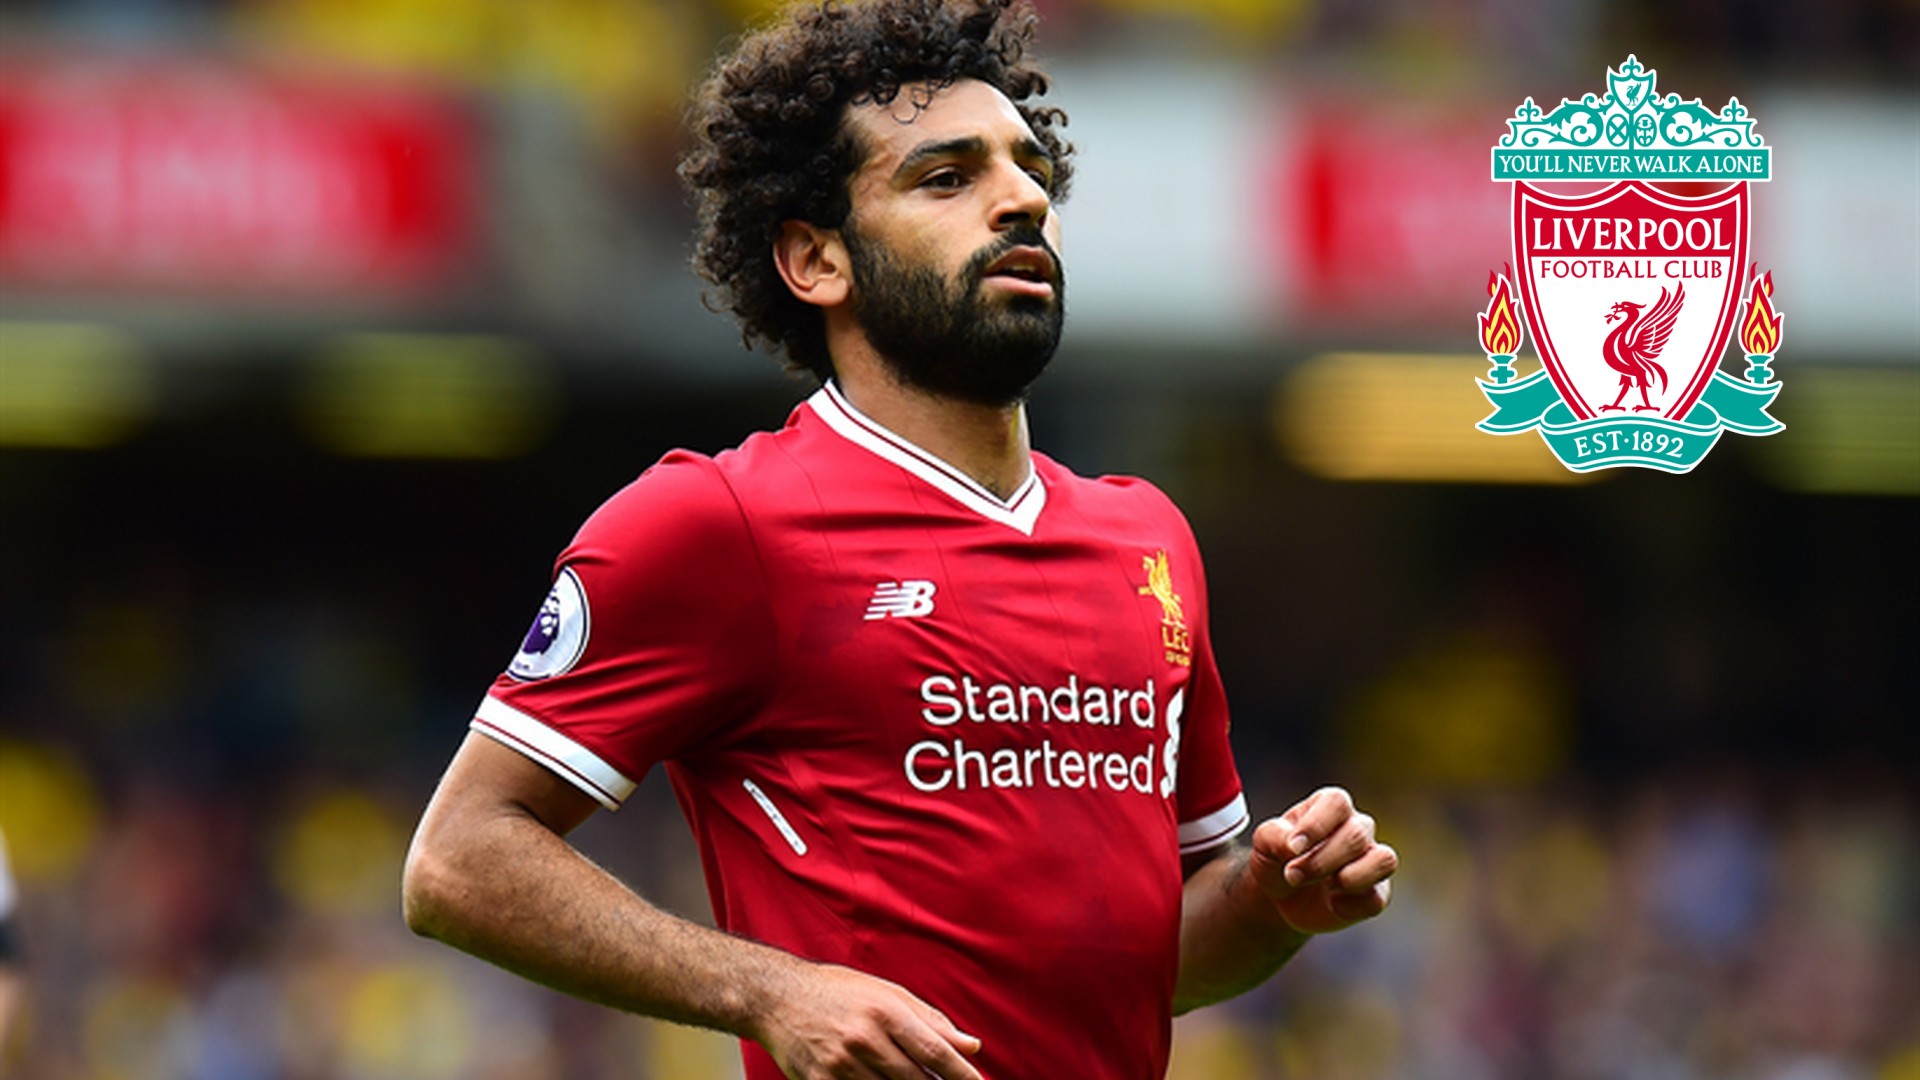 Wallpaper HD Liverpool Mohamed Salah With Resolution 1920X1080 pixel. You can make this wallpaper for your Desktop Computer Backgrounds, Mac Wallpapers, Android Lock screen or iPhone Screensavers